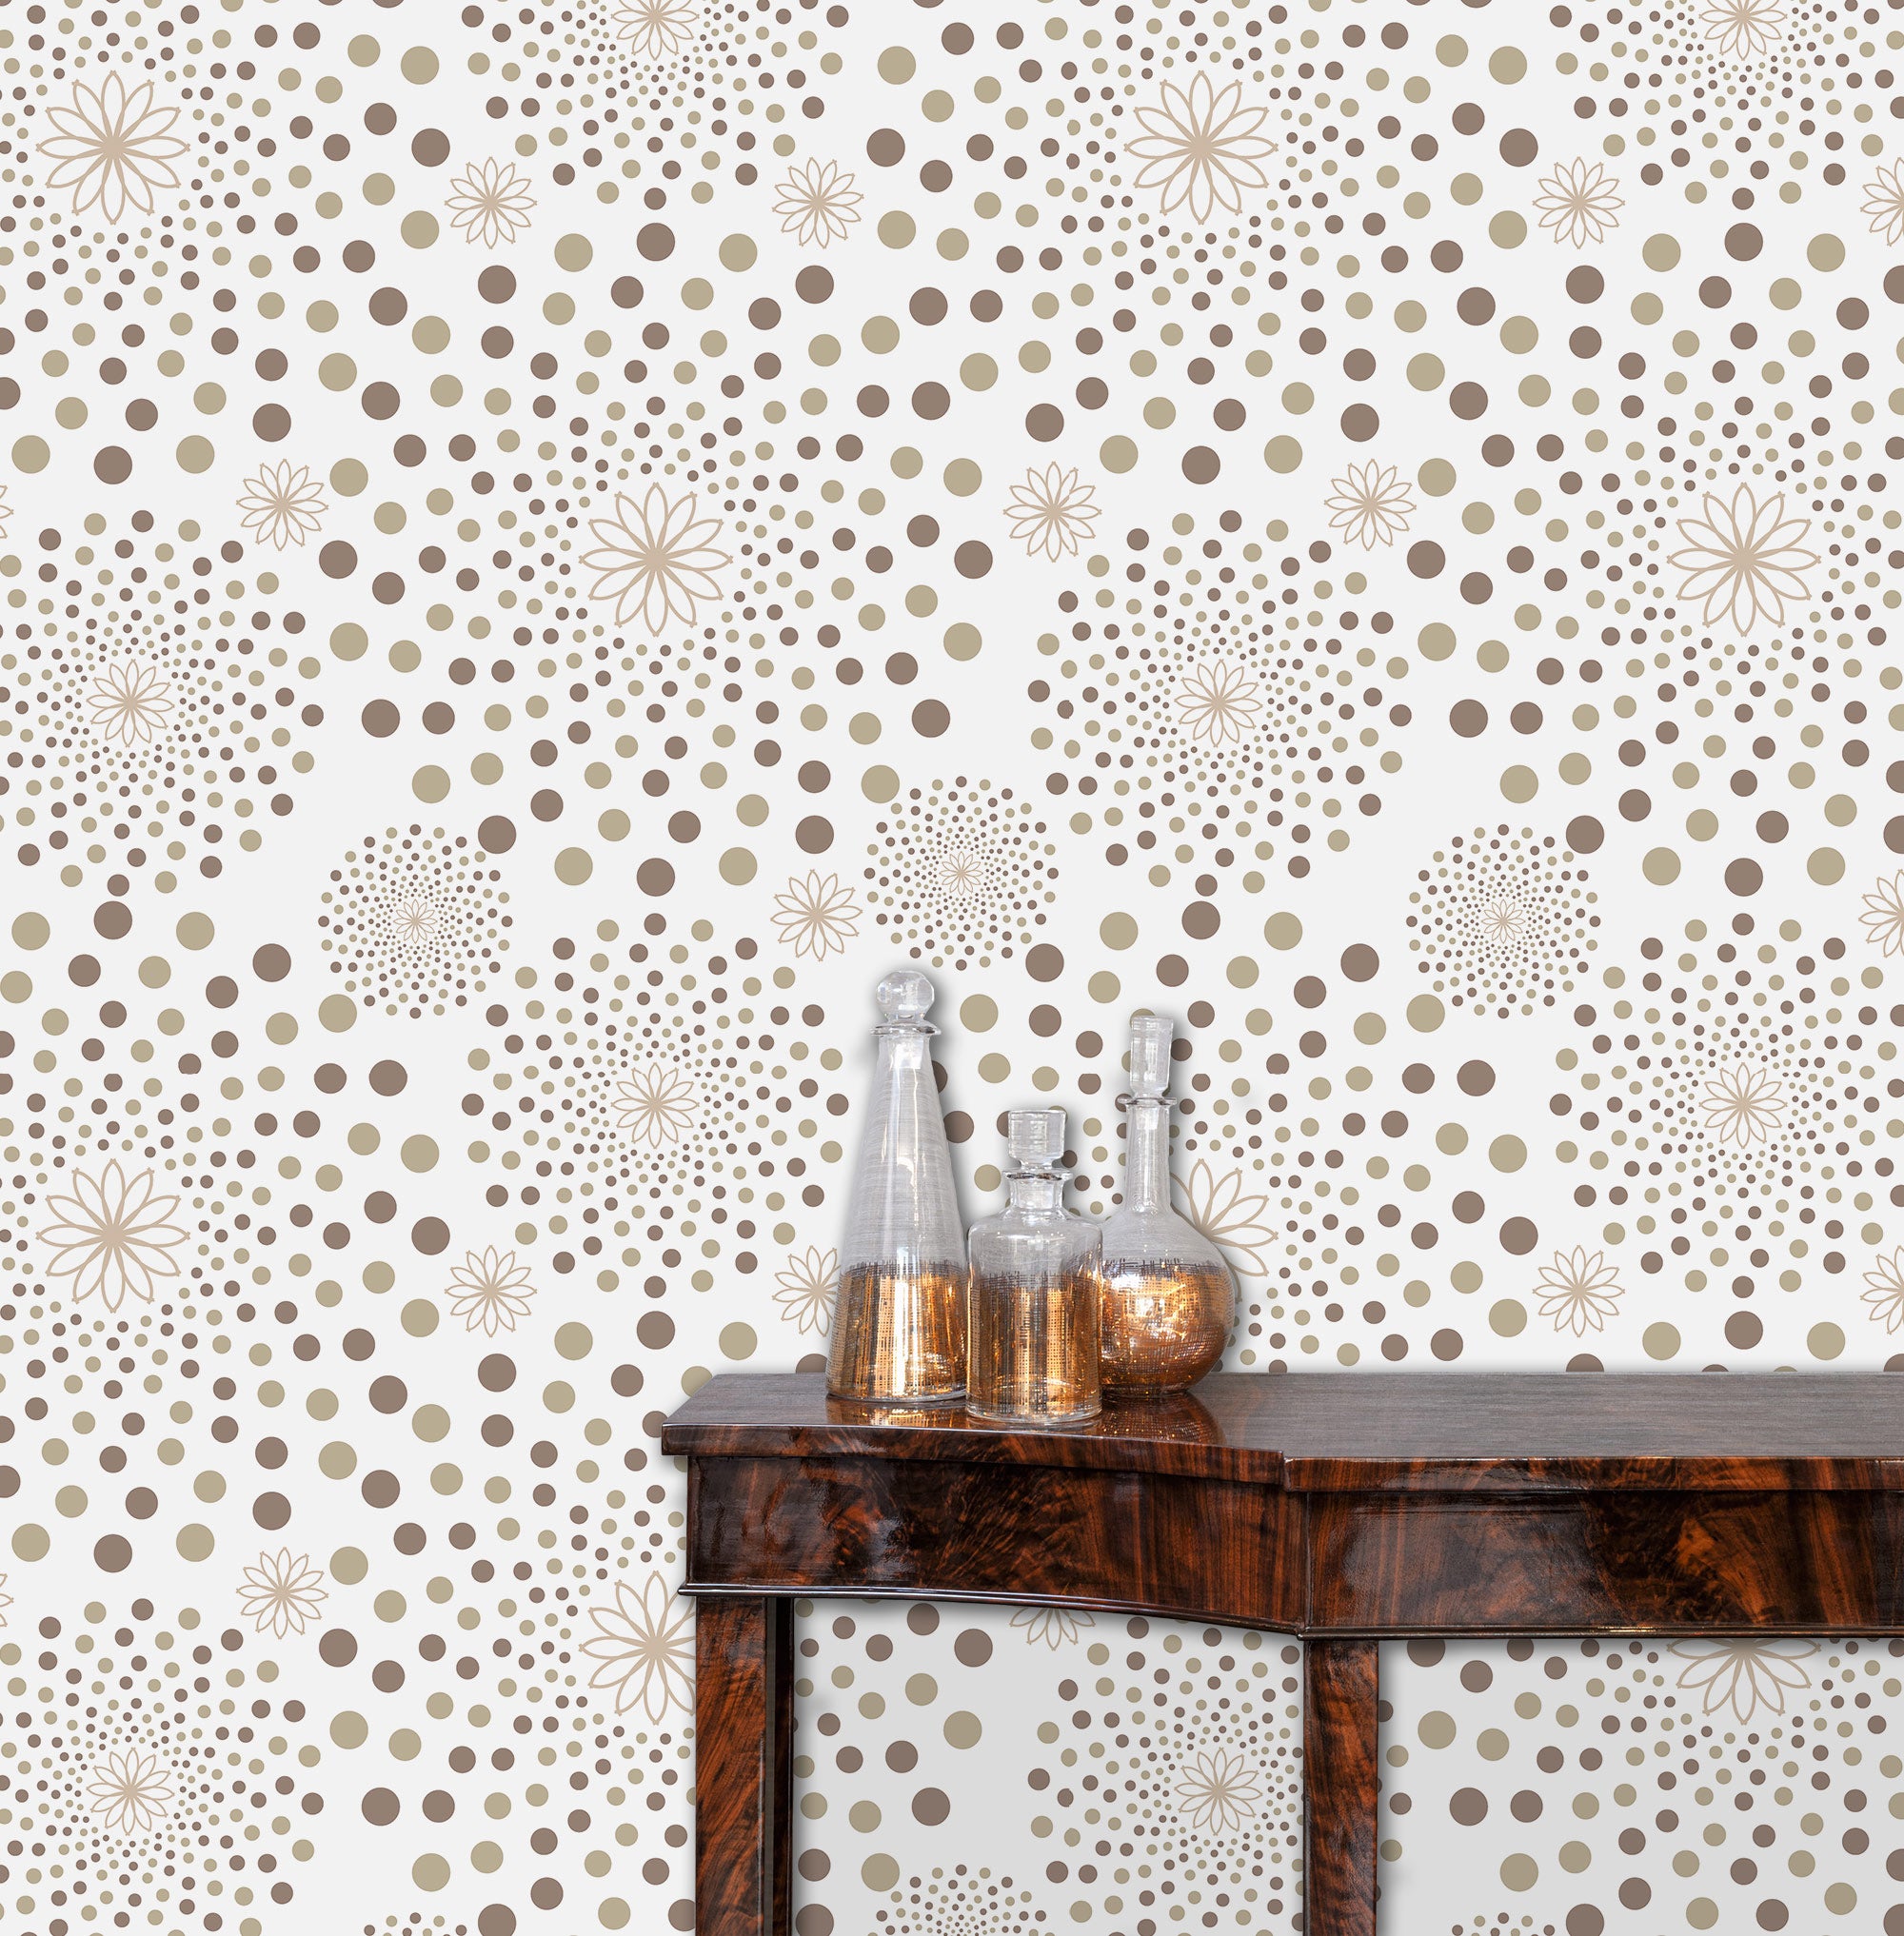 Buy Geometric Abstract Curves Pattern NonPVC SelfAdhesive Peel  Stick  Vinyl Wallpaper Roll Online in India at Best Price  Modern WallPaper   Wall Arts  Home Decor  Furniture  Wooden Street Product